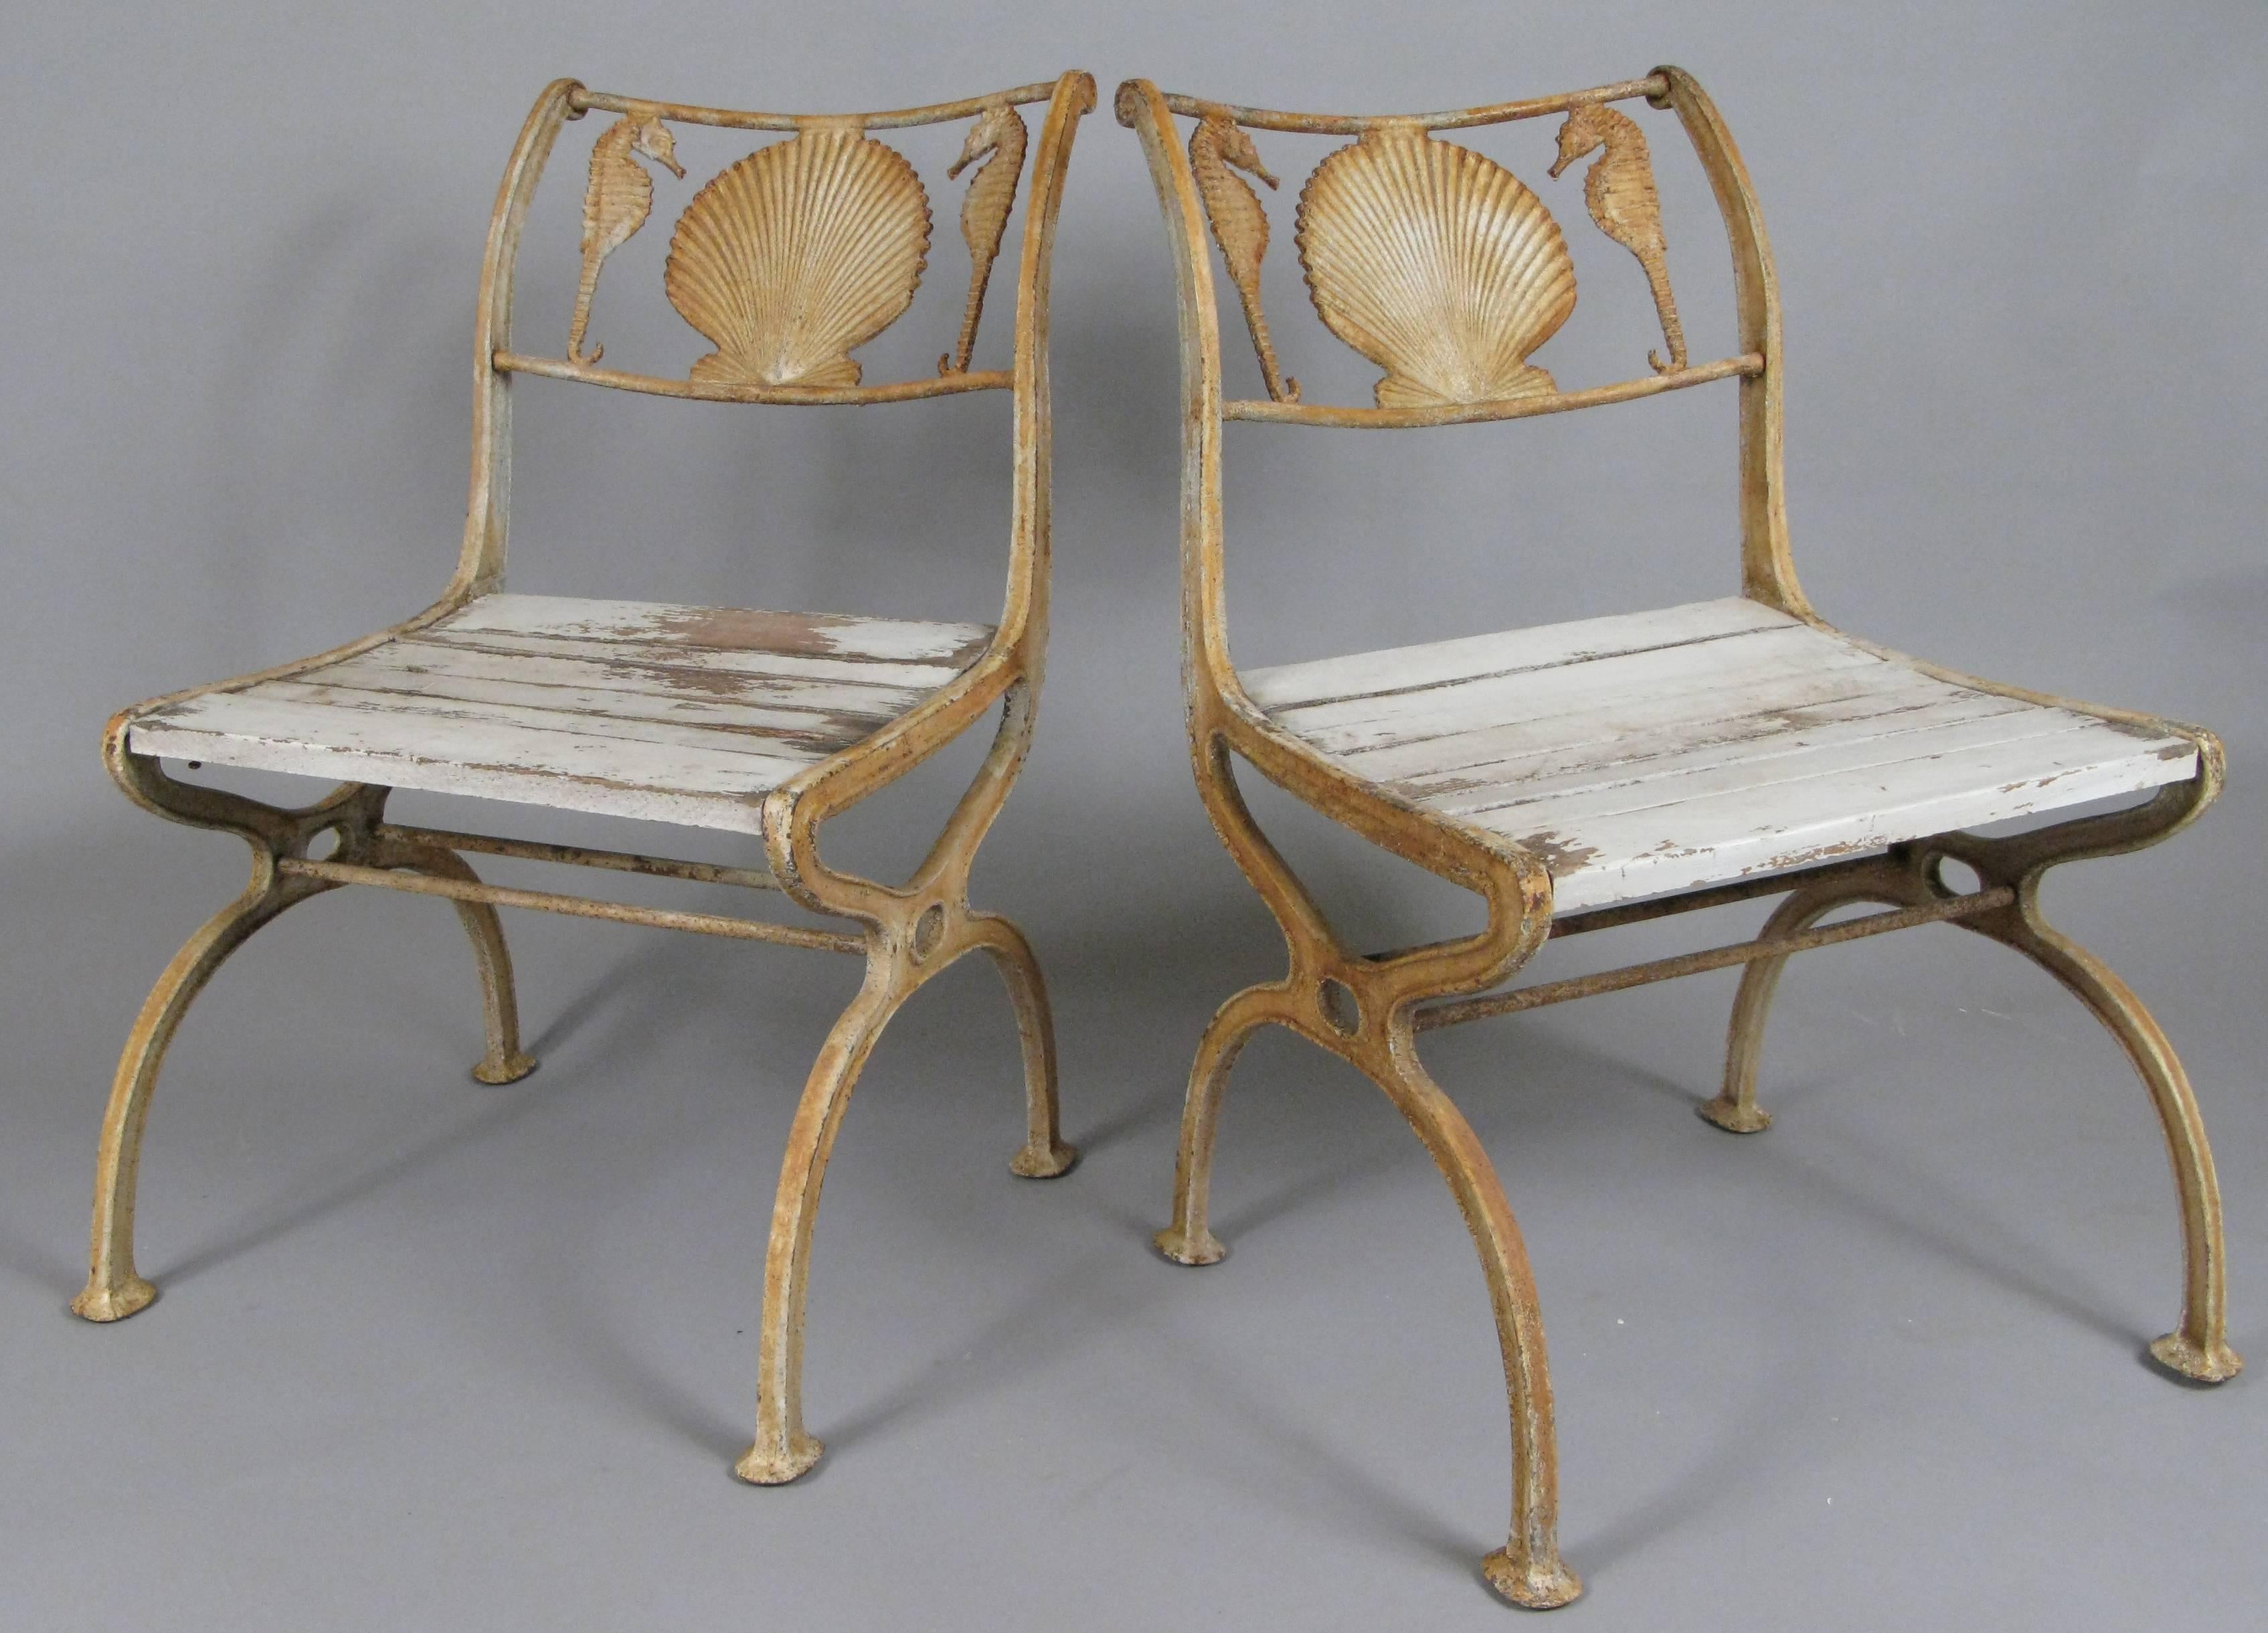 A pair of antique 1920s cast iron chairs with a seashell and seahorse motif in the curved frieze on the back of the chair. wonderful scale and in original condition. 